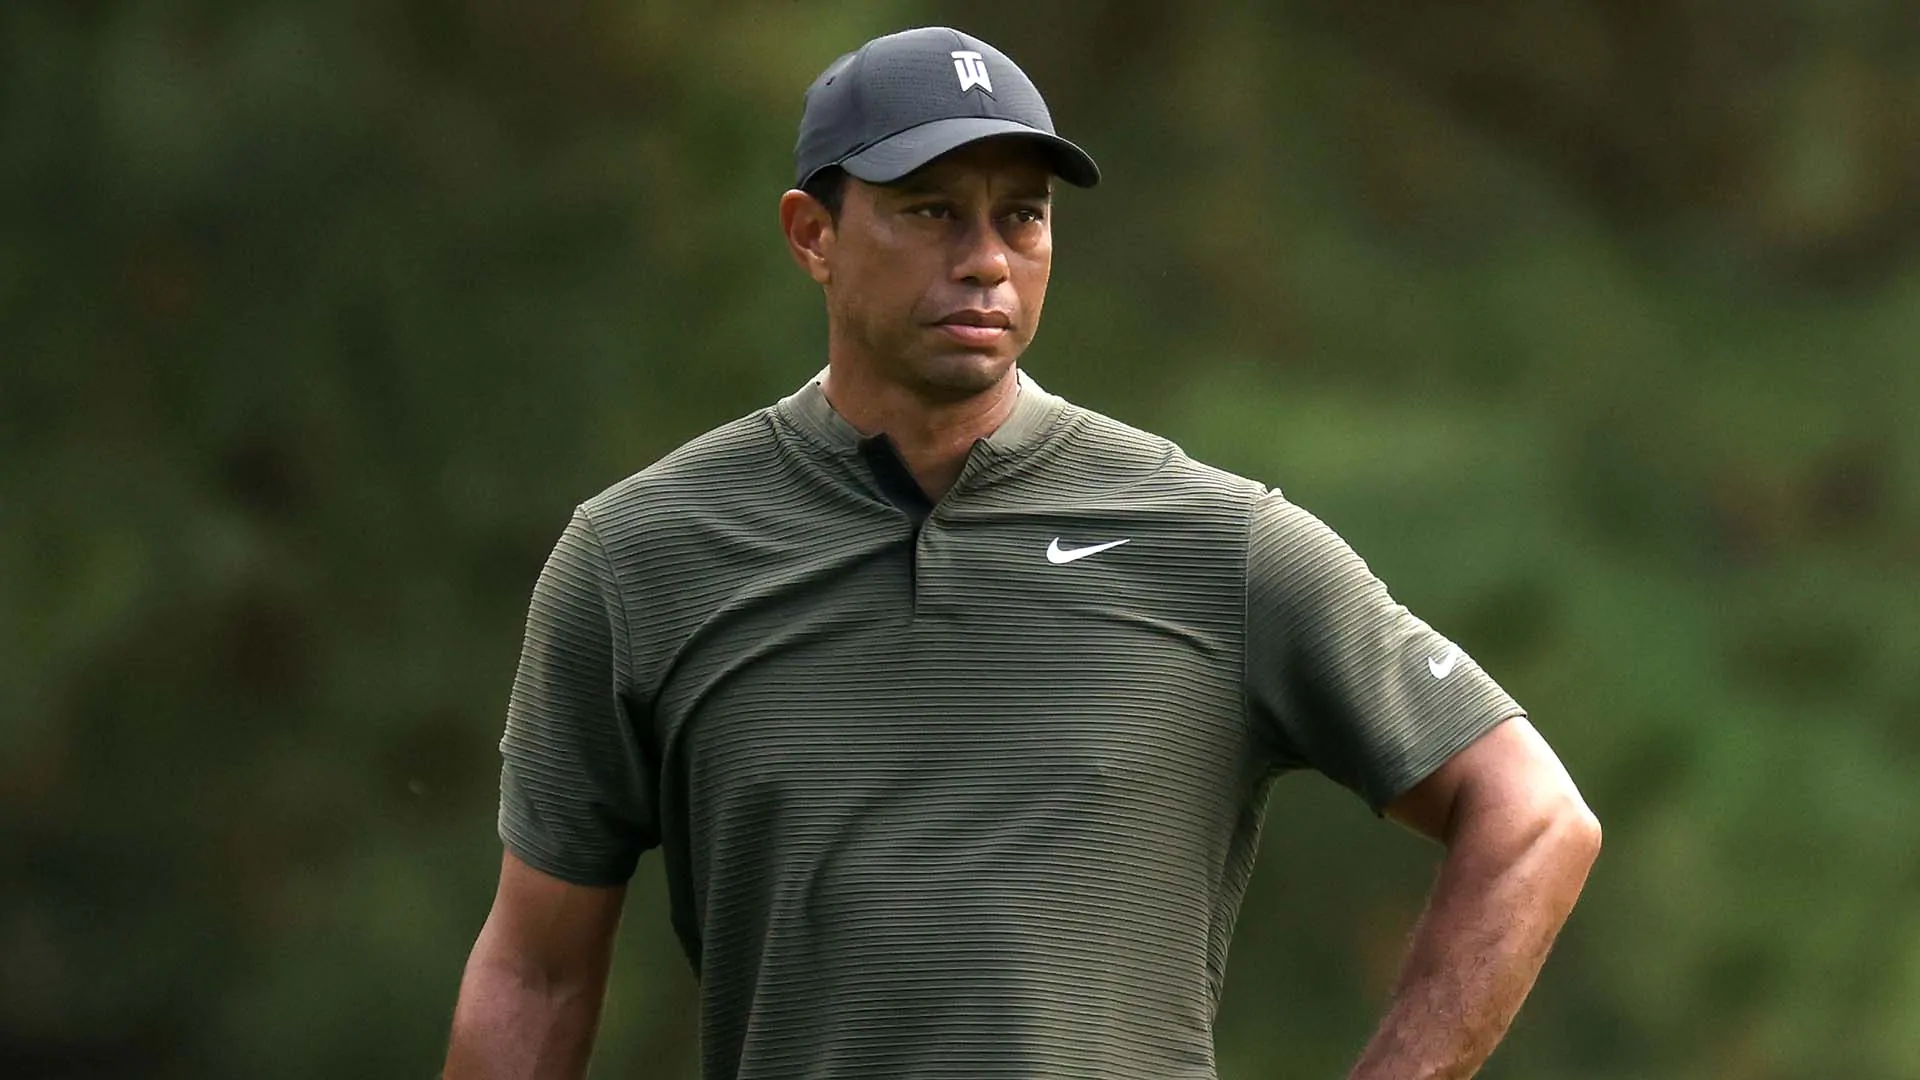 No surprise: Tiger Woods won’t play WGC event at Concession